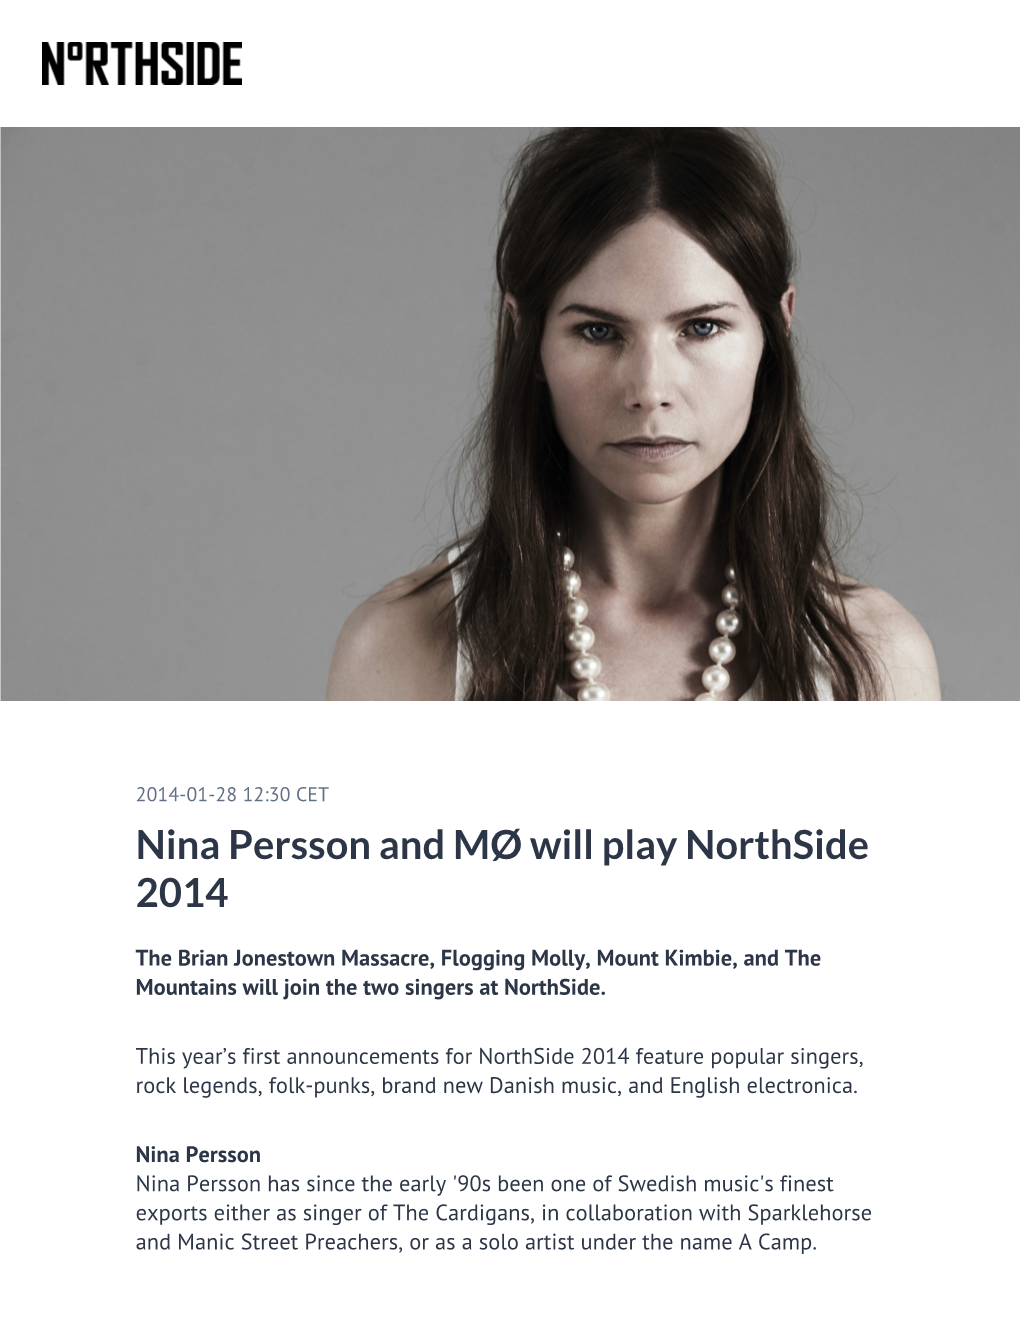 Nina Persson and MØ Will Play Northside 2014